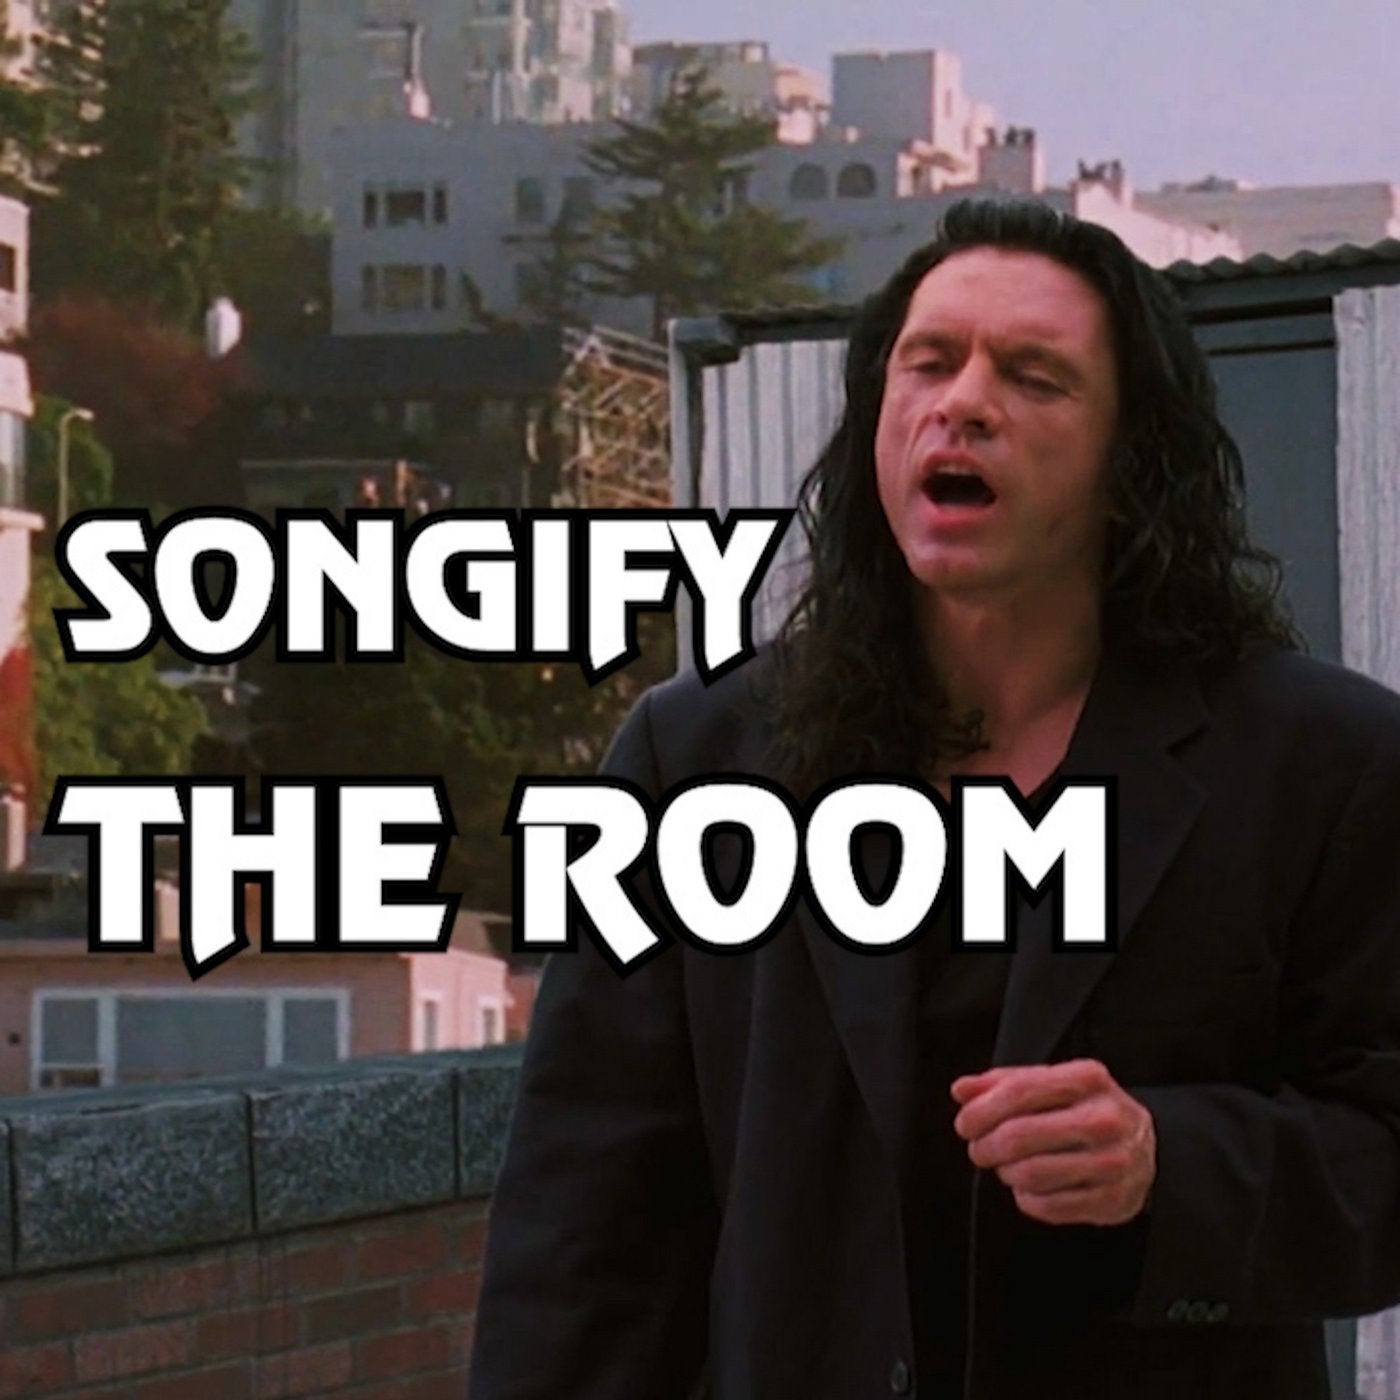 You're Tearing Me Apart (Songify The Room)